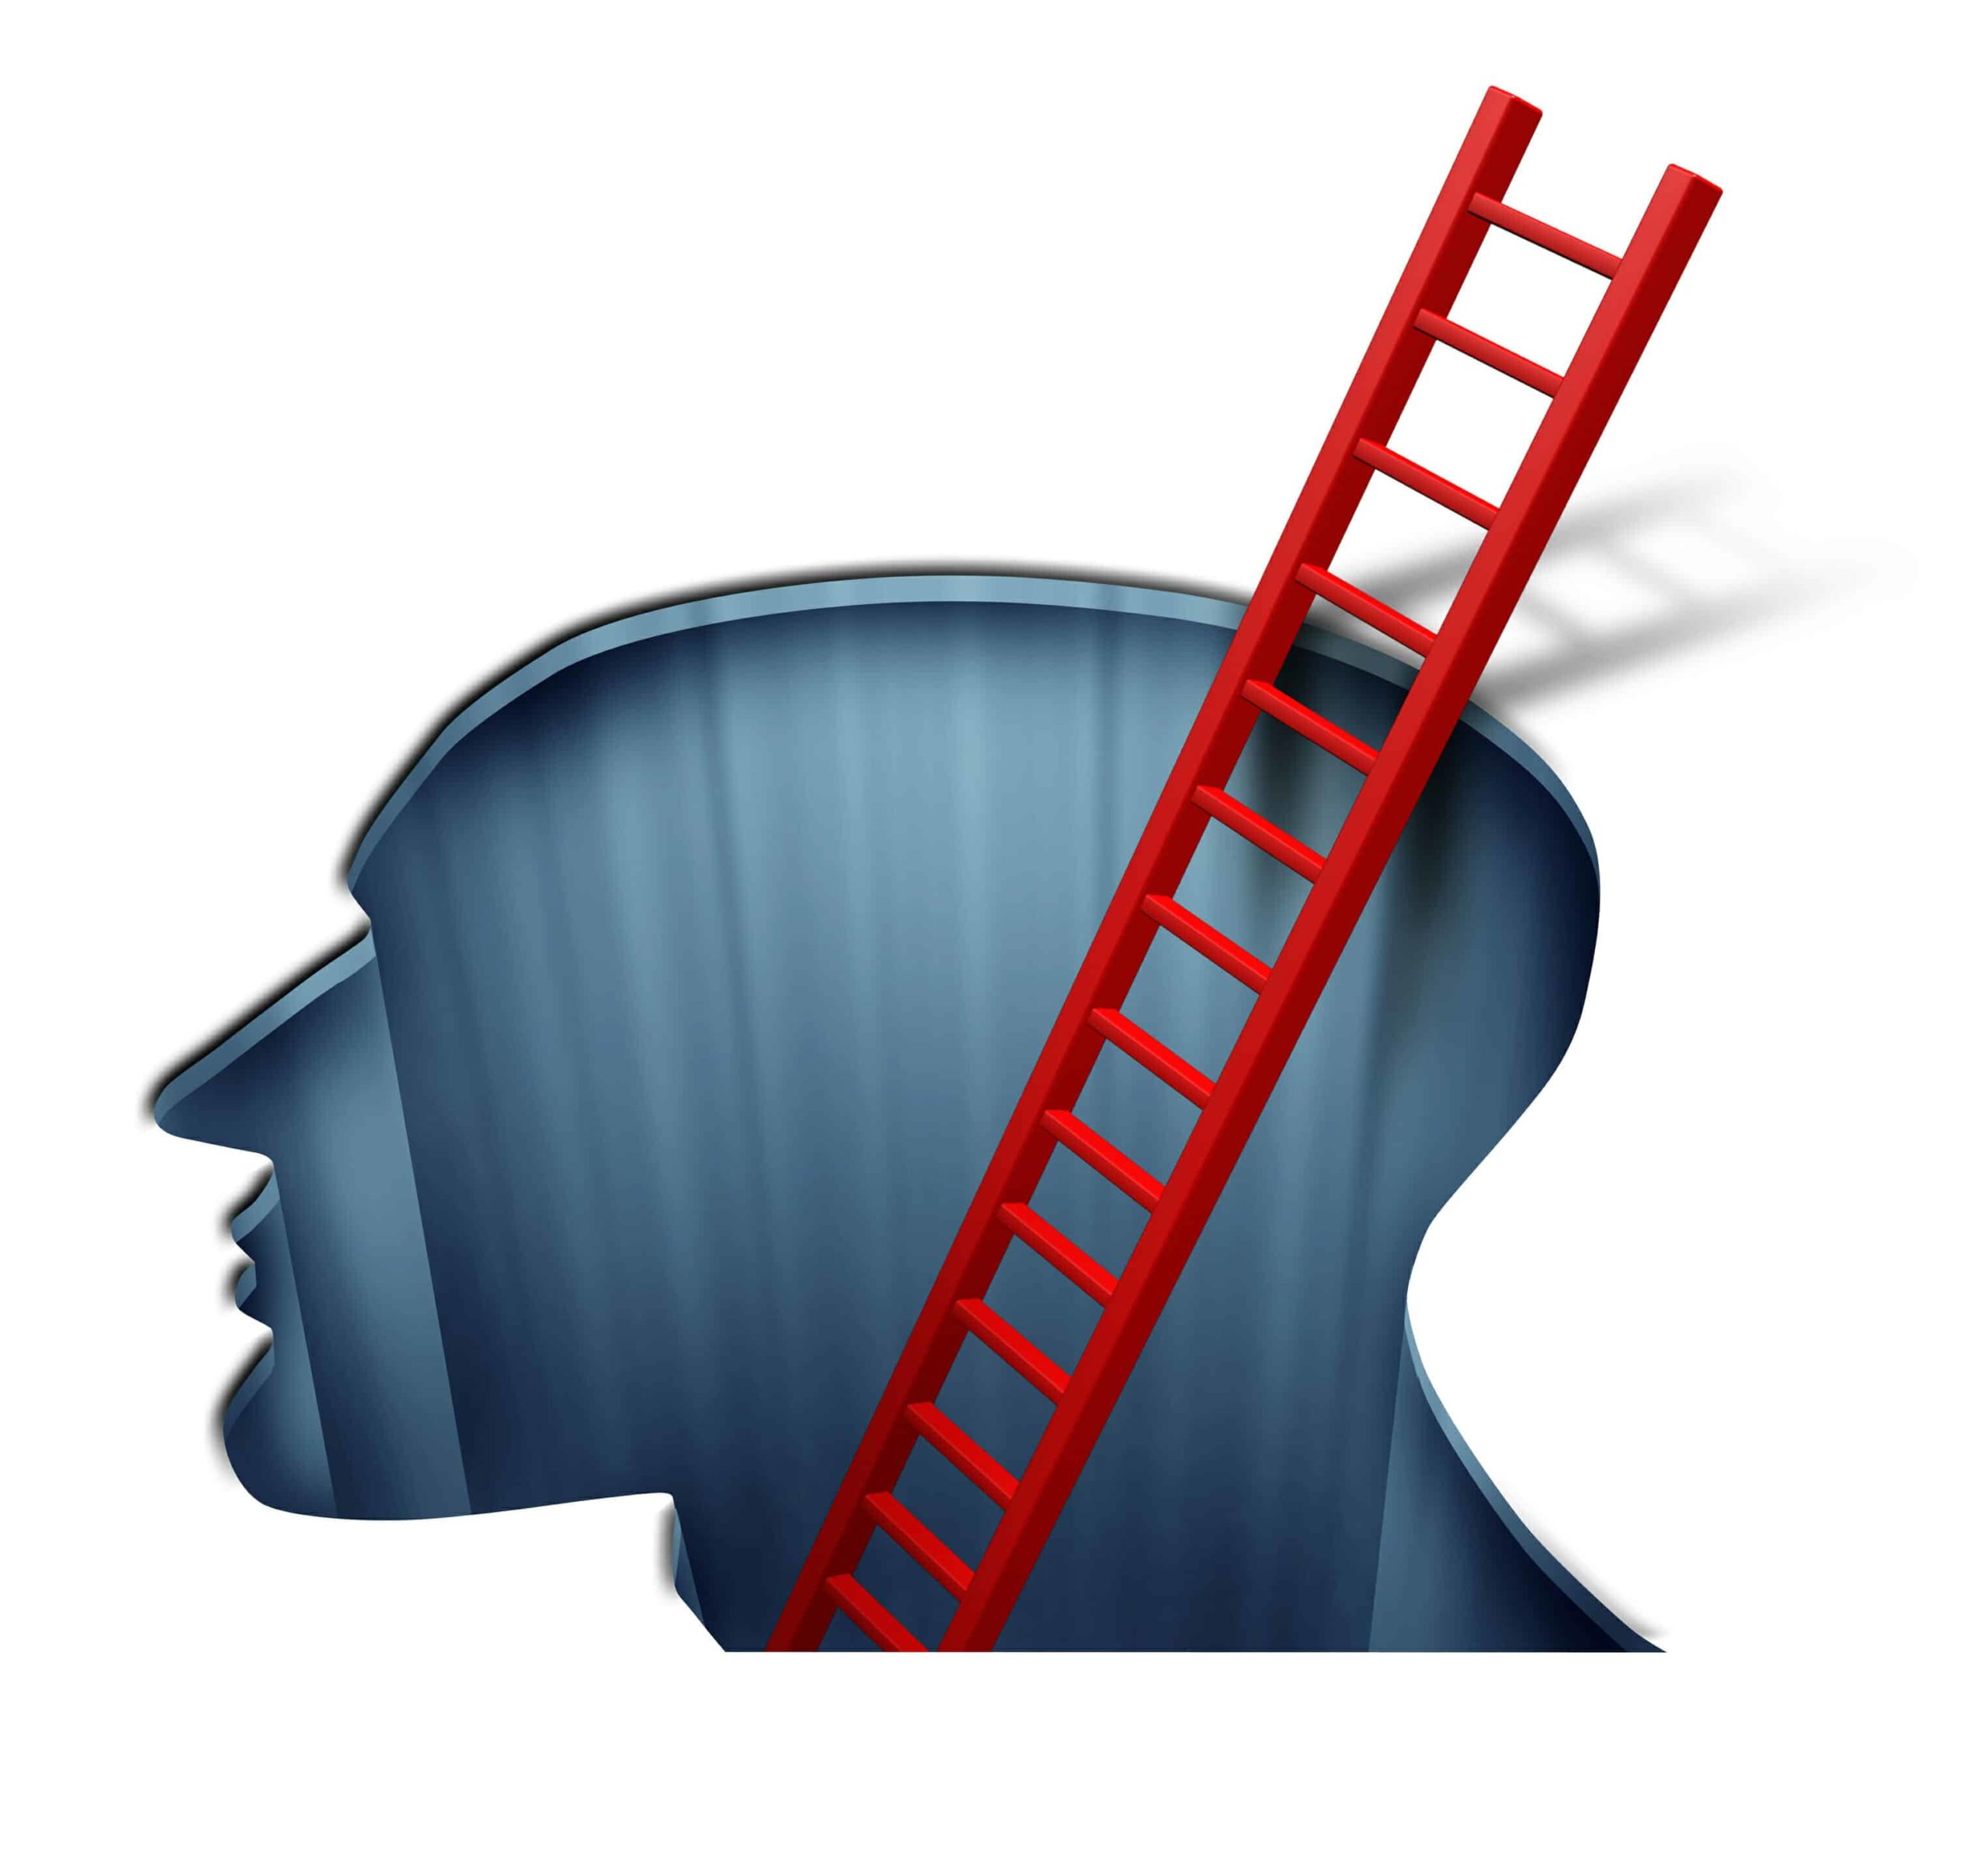 Silhouette of a head on a white background with a red ladder coming out of it.